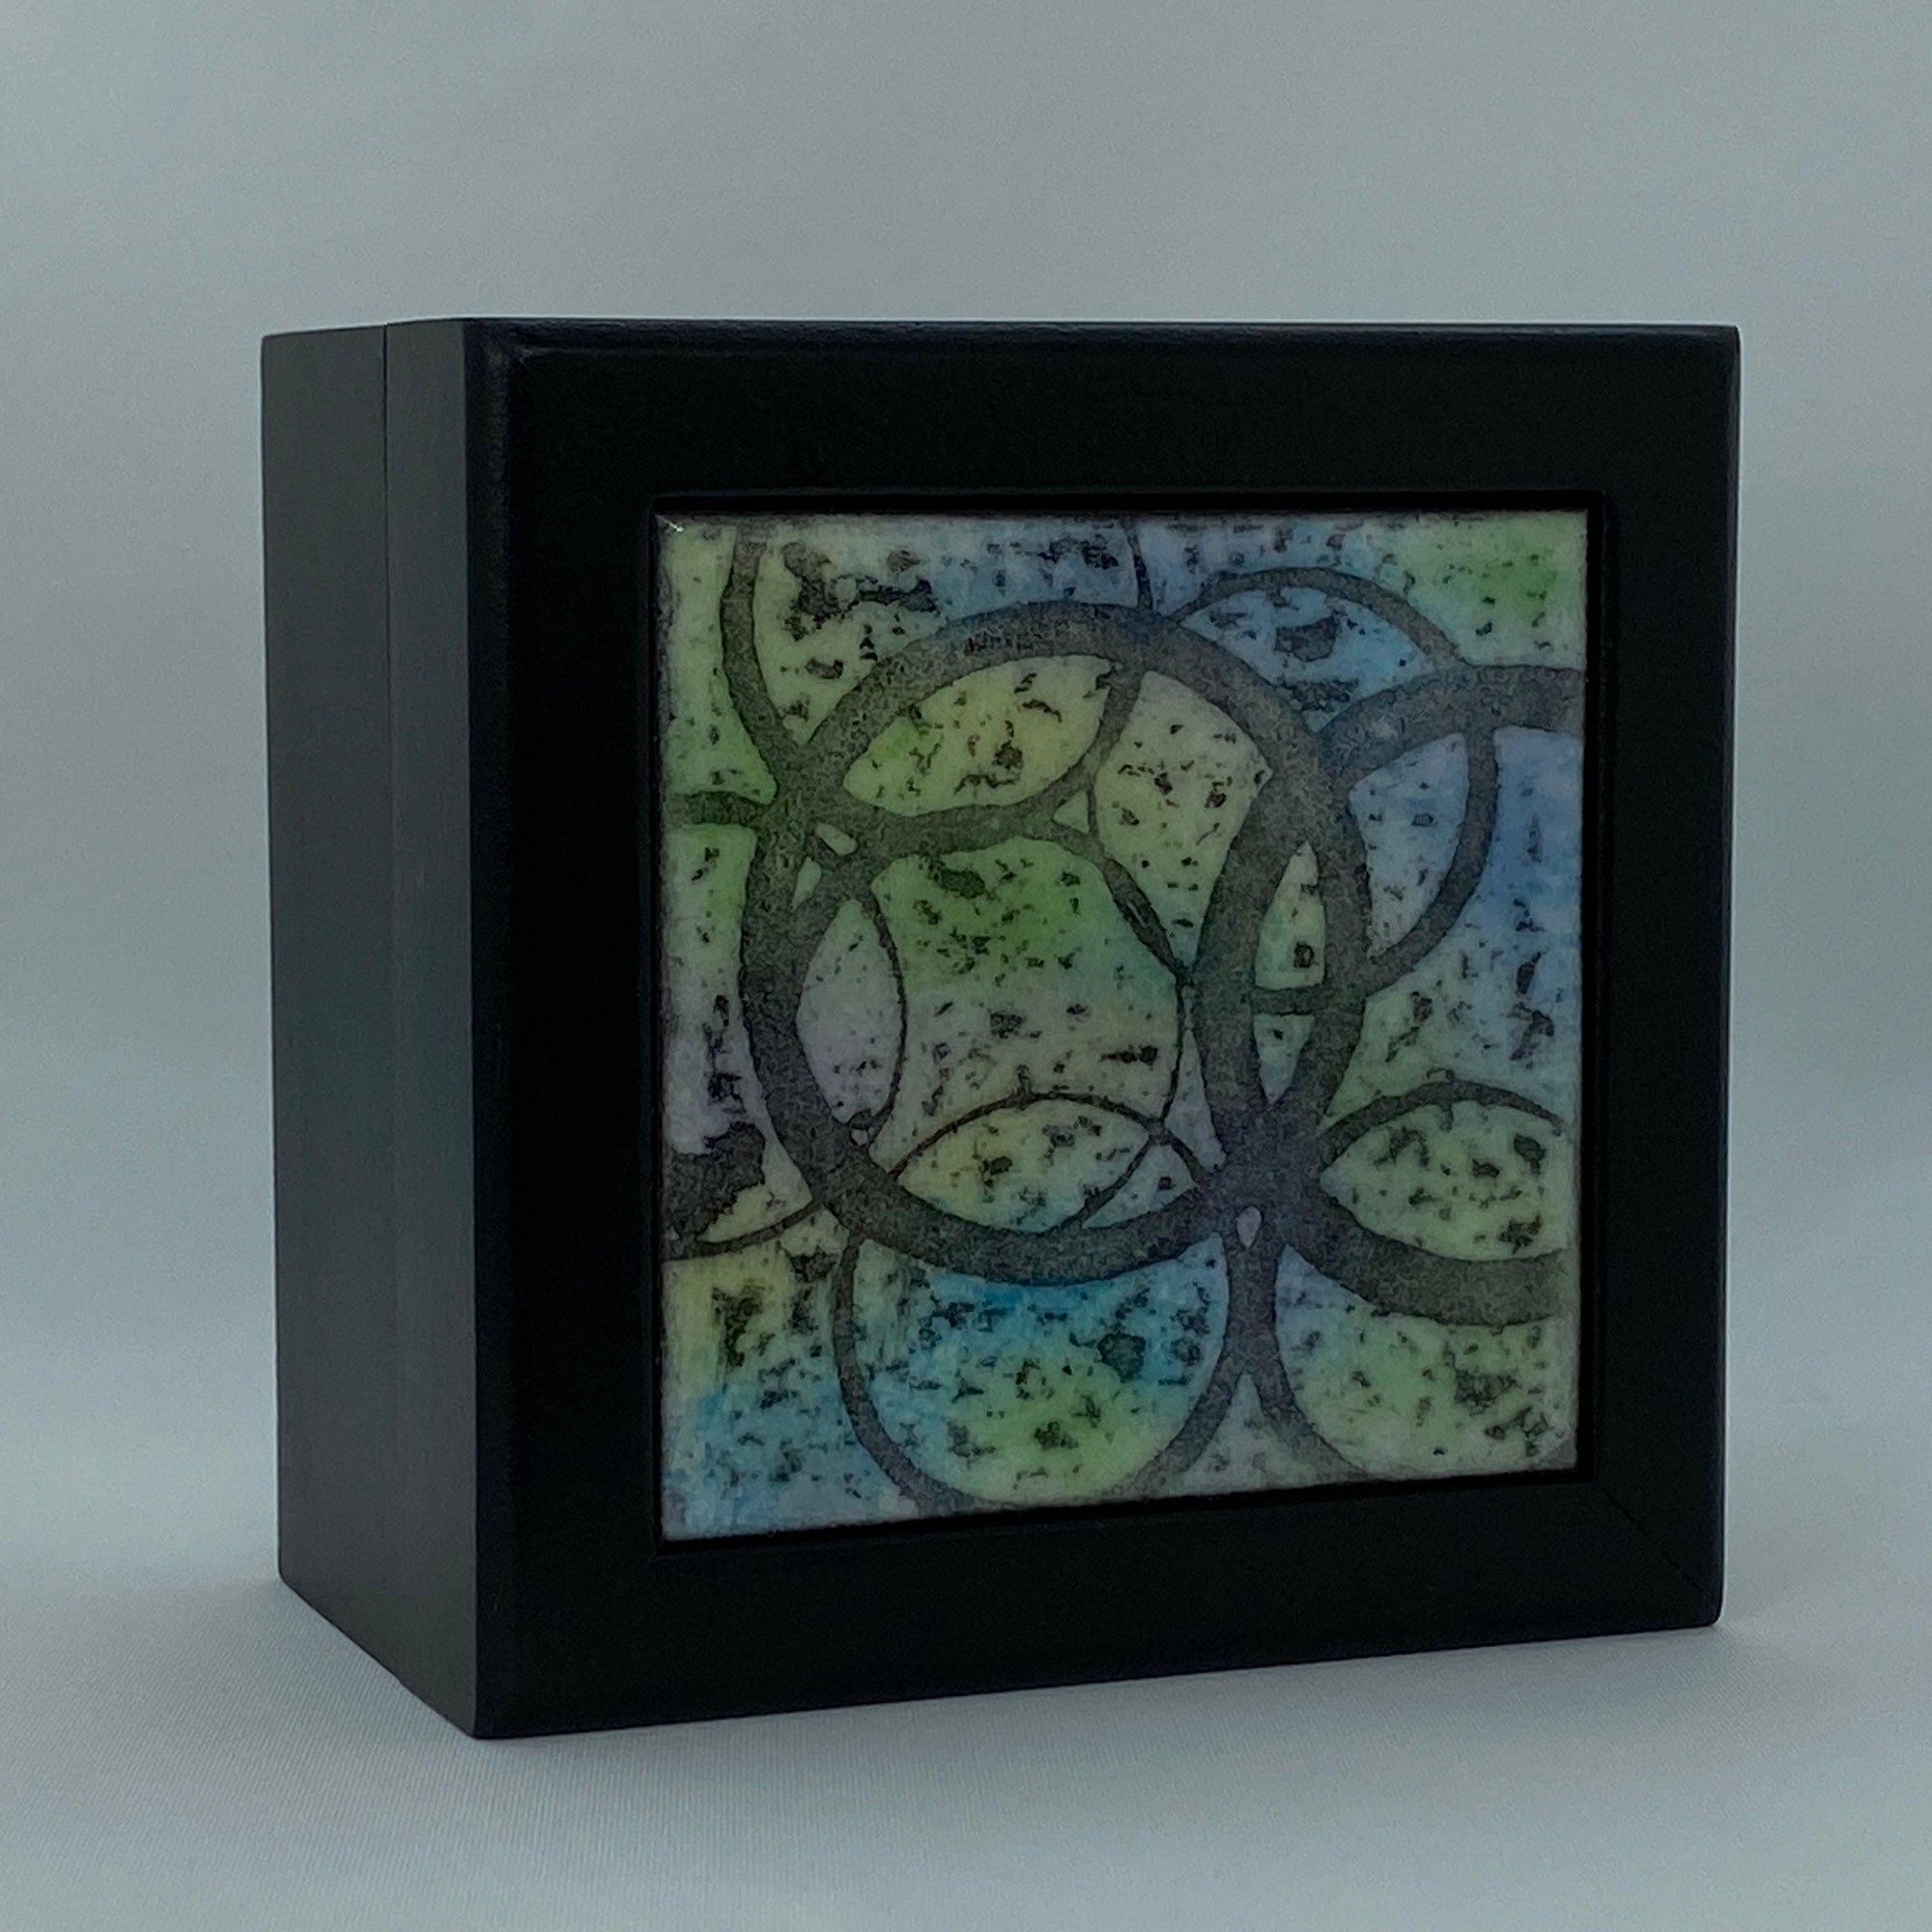 Camille Patton Circles Dark Vitreous Enamel Inlay in lid of wooden box